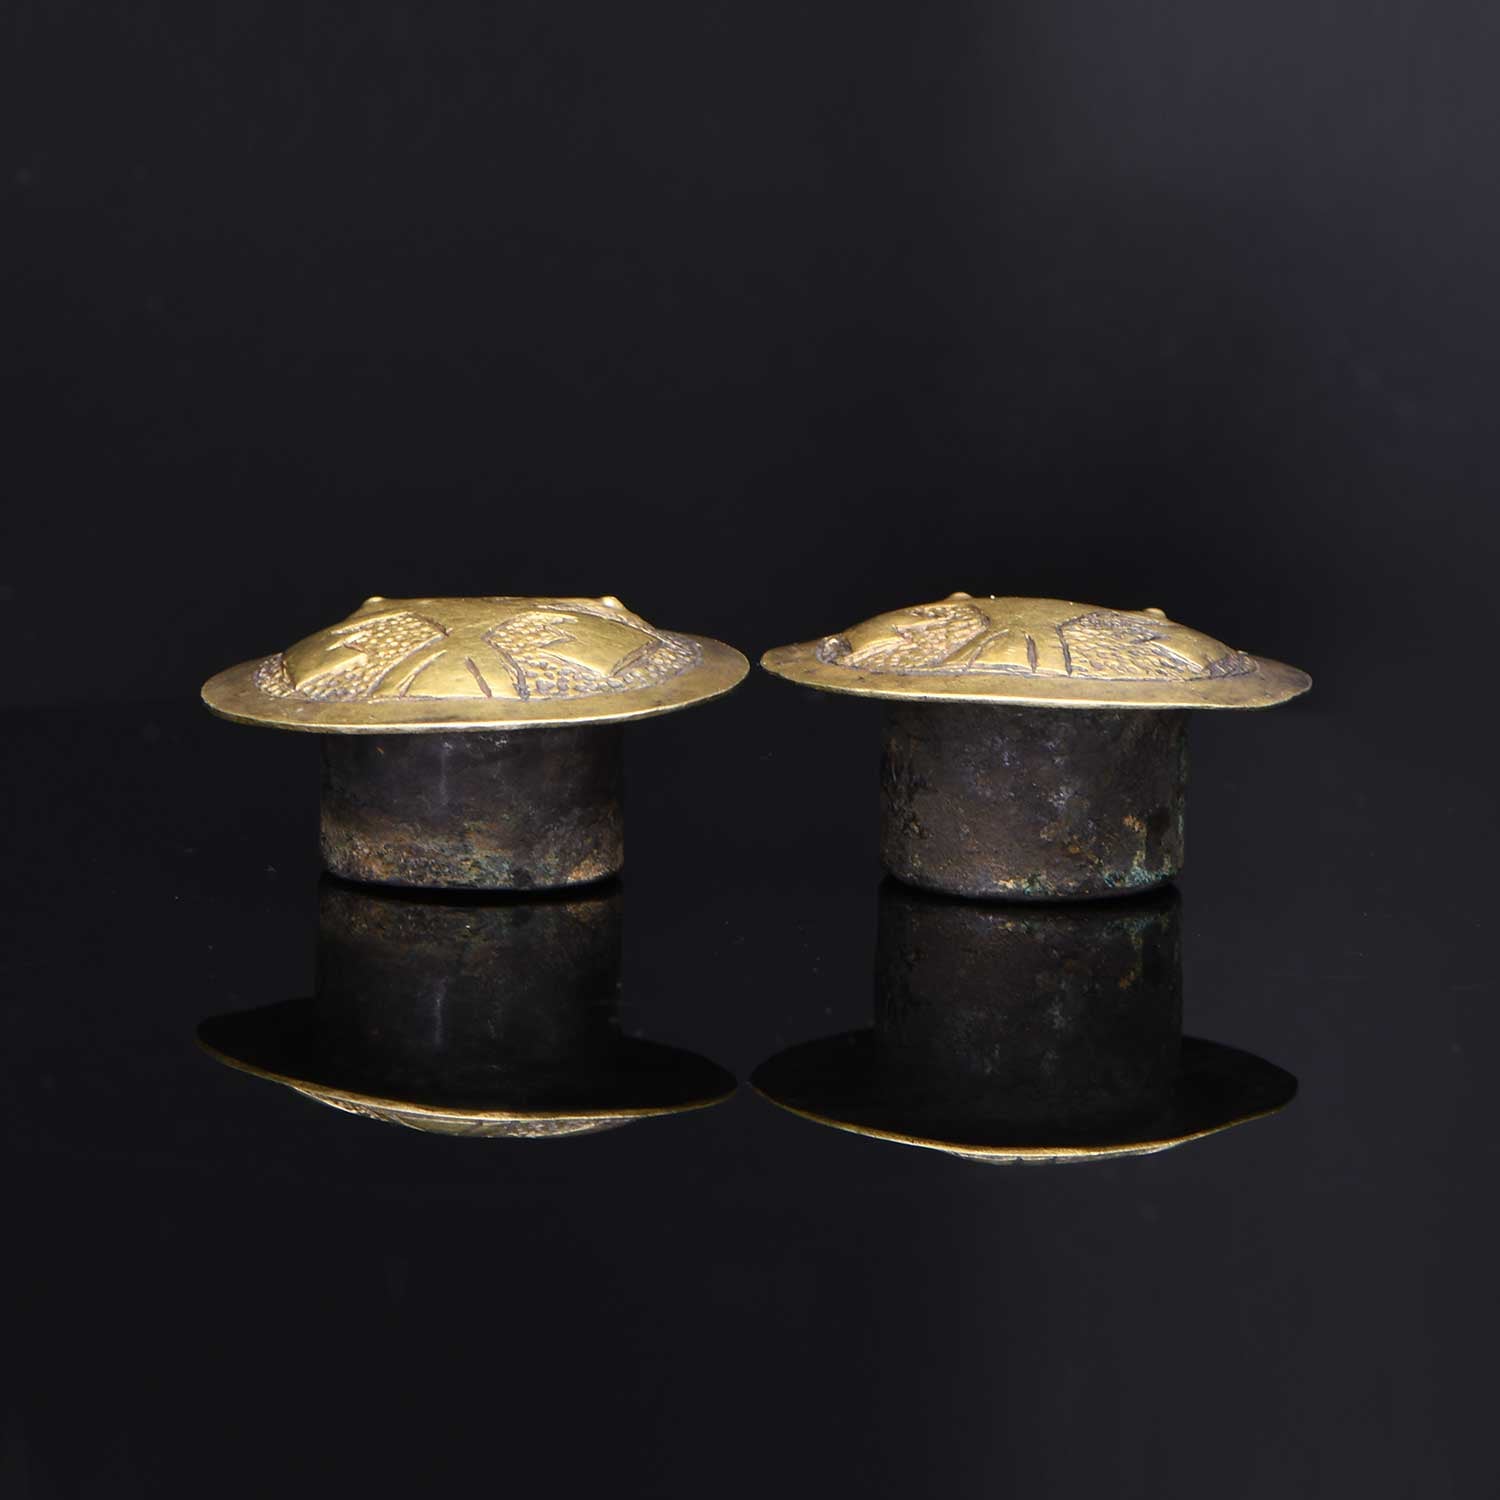 A pair of Nazca Gold & Silver Rattle Ear Spools, Early Intermediate Period, ca. 200 - 400 CE